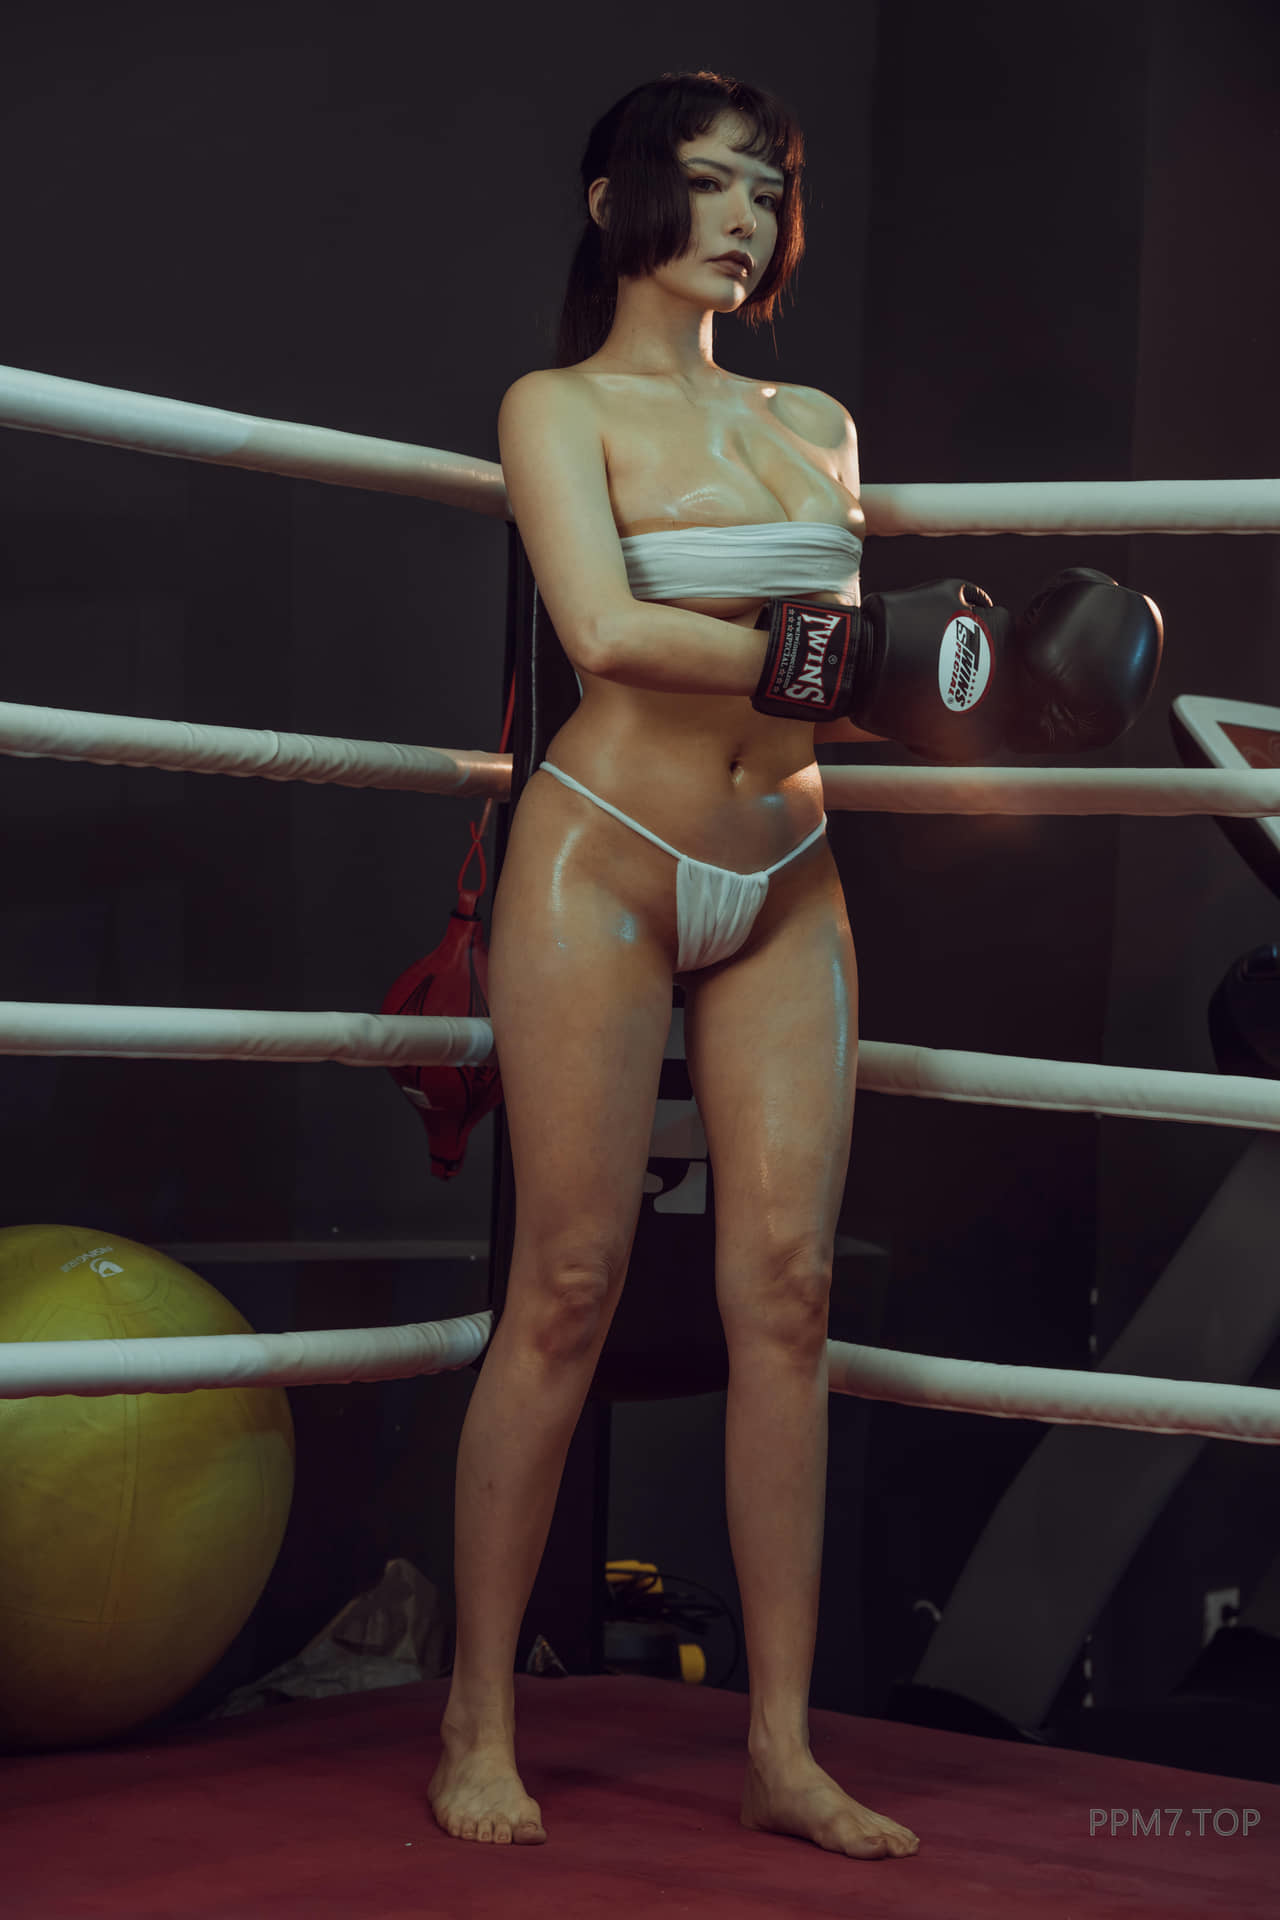 This is the real female boxing doge